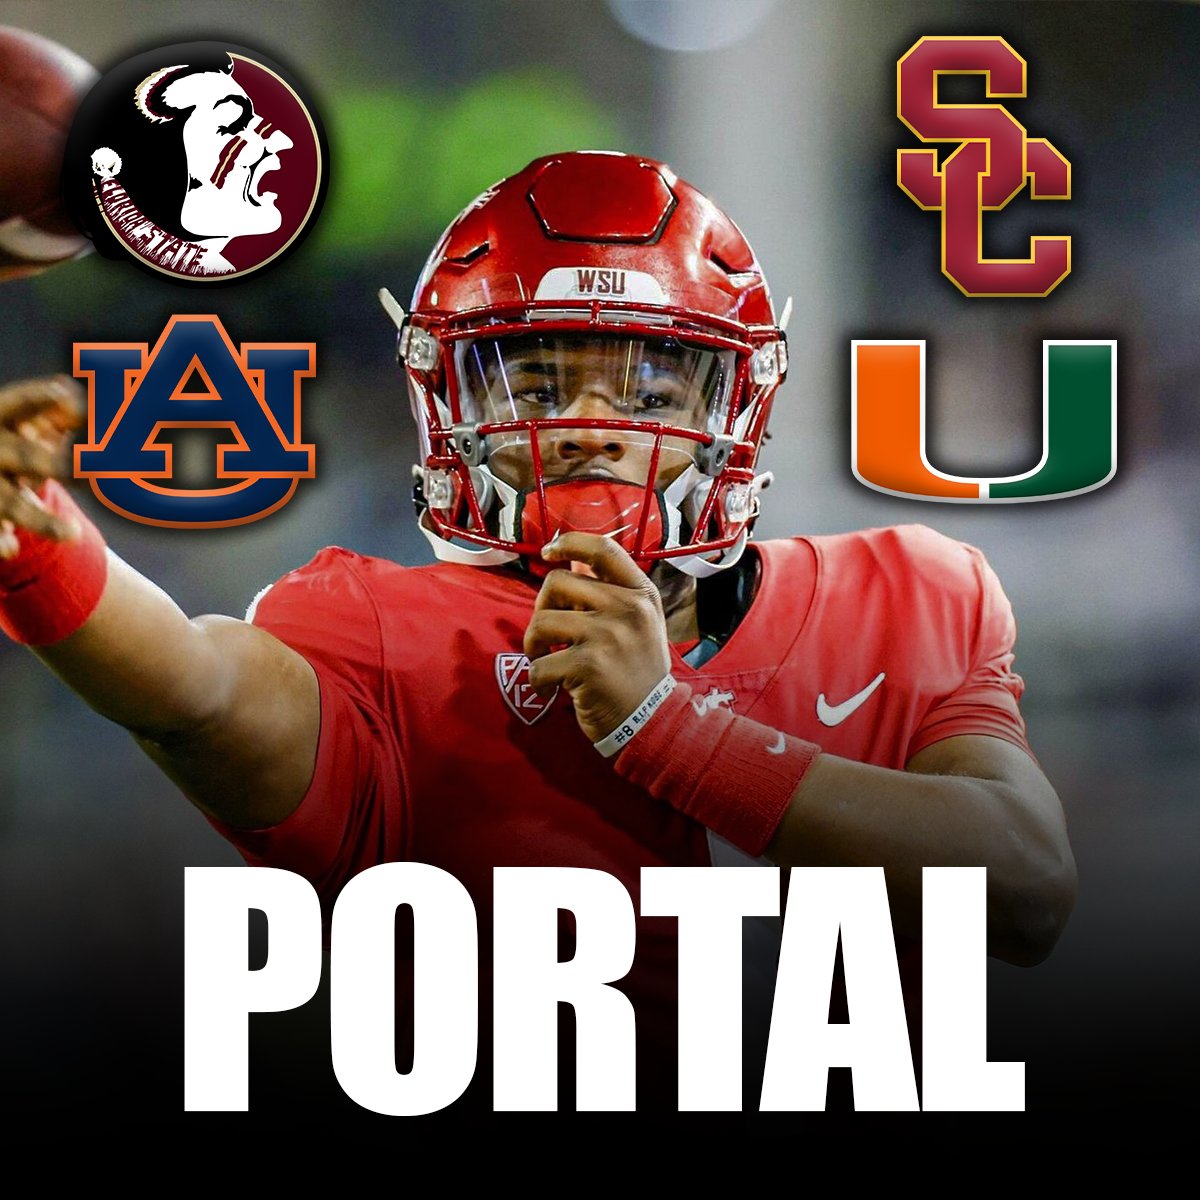 🚨 | BREAKING: The #1 QB in the Transfer Portal is narrowing down his recruitment.. It's being reported that there's only FOUR teams left with a realistic shot at landing Cam Ward: 🏈 Florida State Seminoles 🏈 USC Trojans 🏈 Auburn Tigers 🏈 Miami Hurricanes (Via @CougfanCOM)